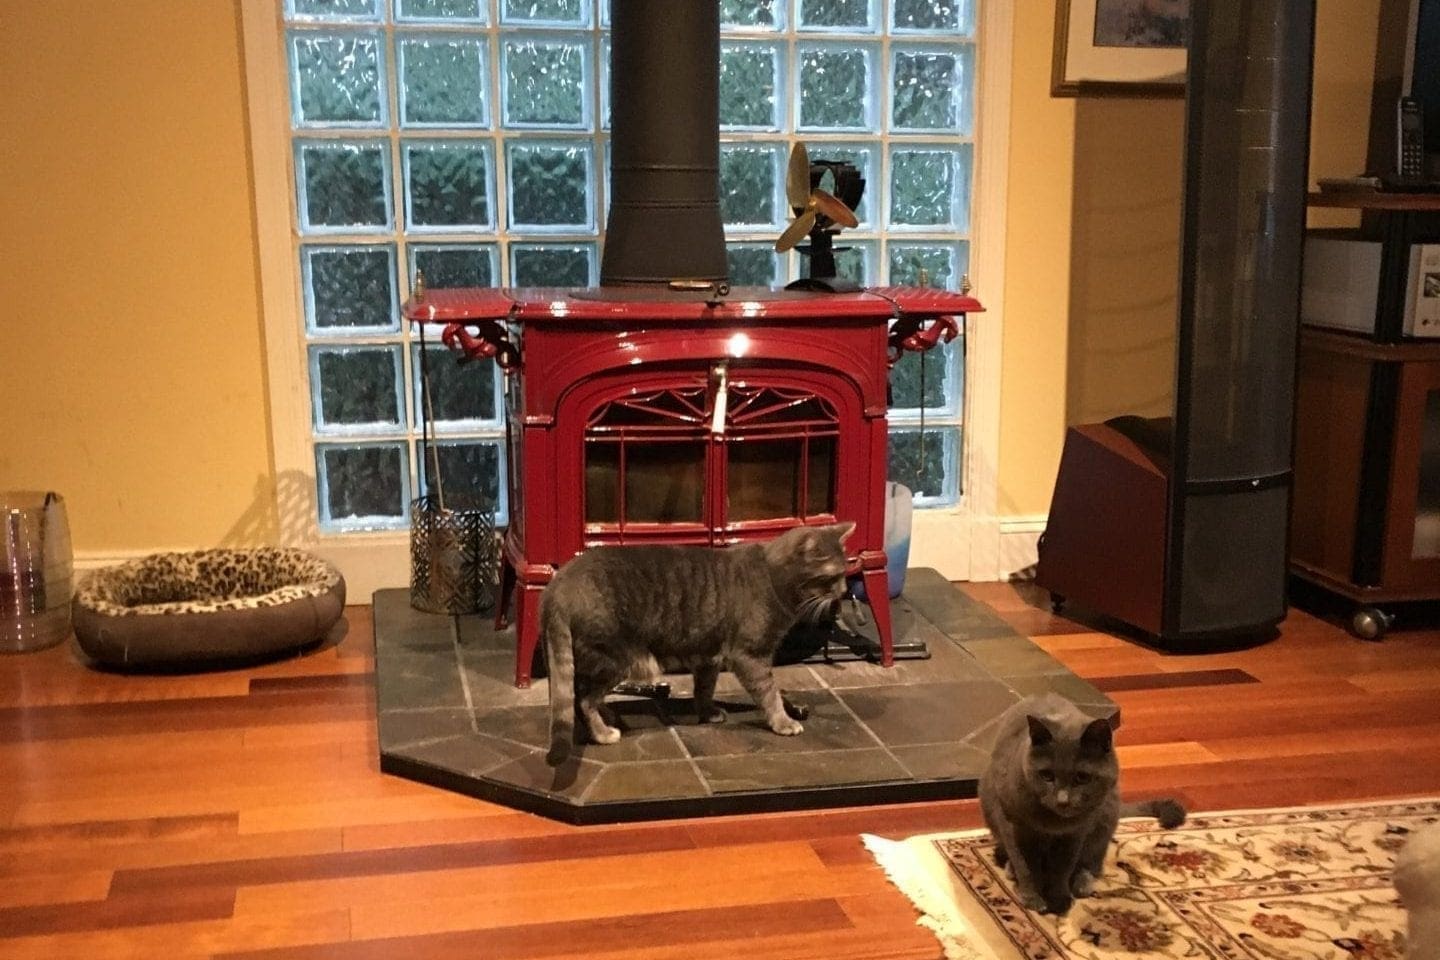 Two cats standing in front of a red stove in a living room.